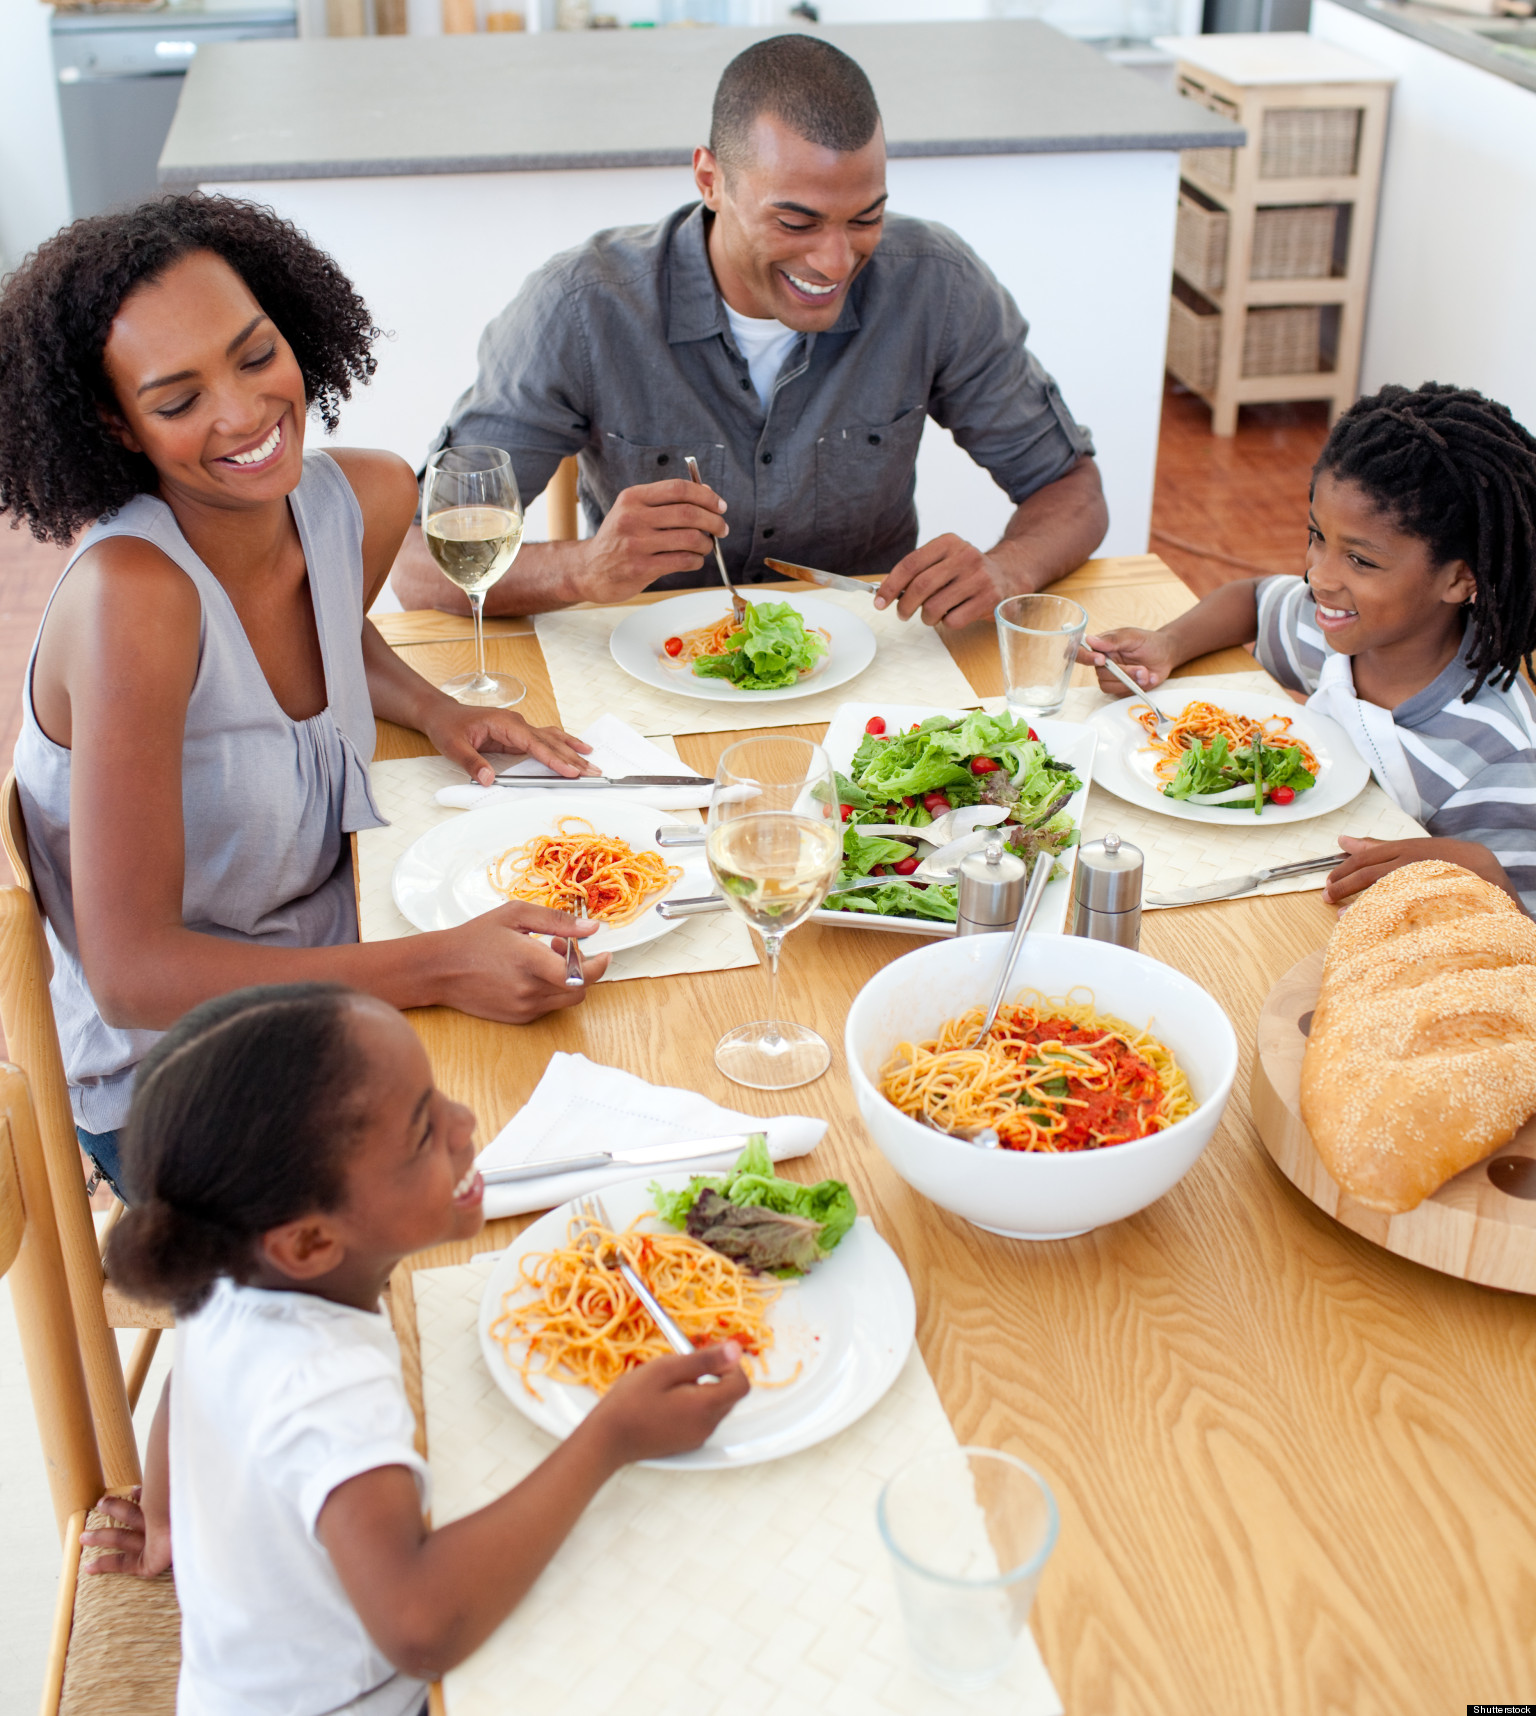 Family Mealtime: Most Families Eat Dinner Together Most Nights (STUDY